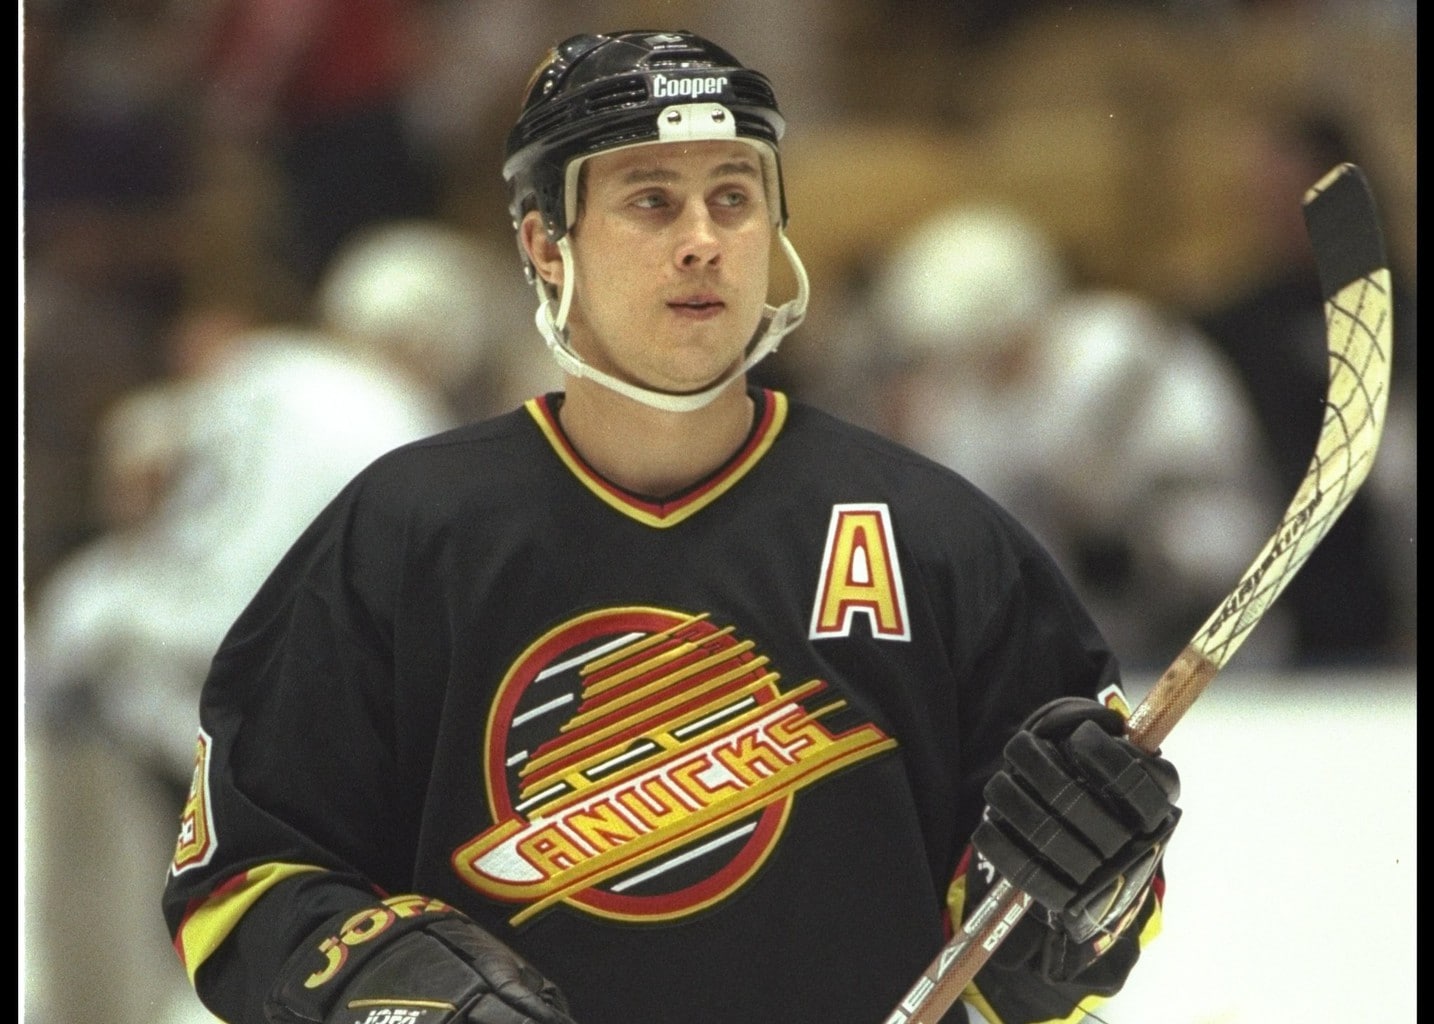 Canucks 40th anniversary: 40 greatest players in team history